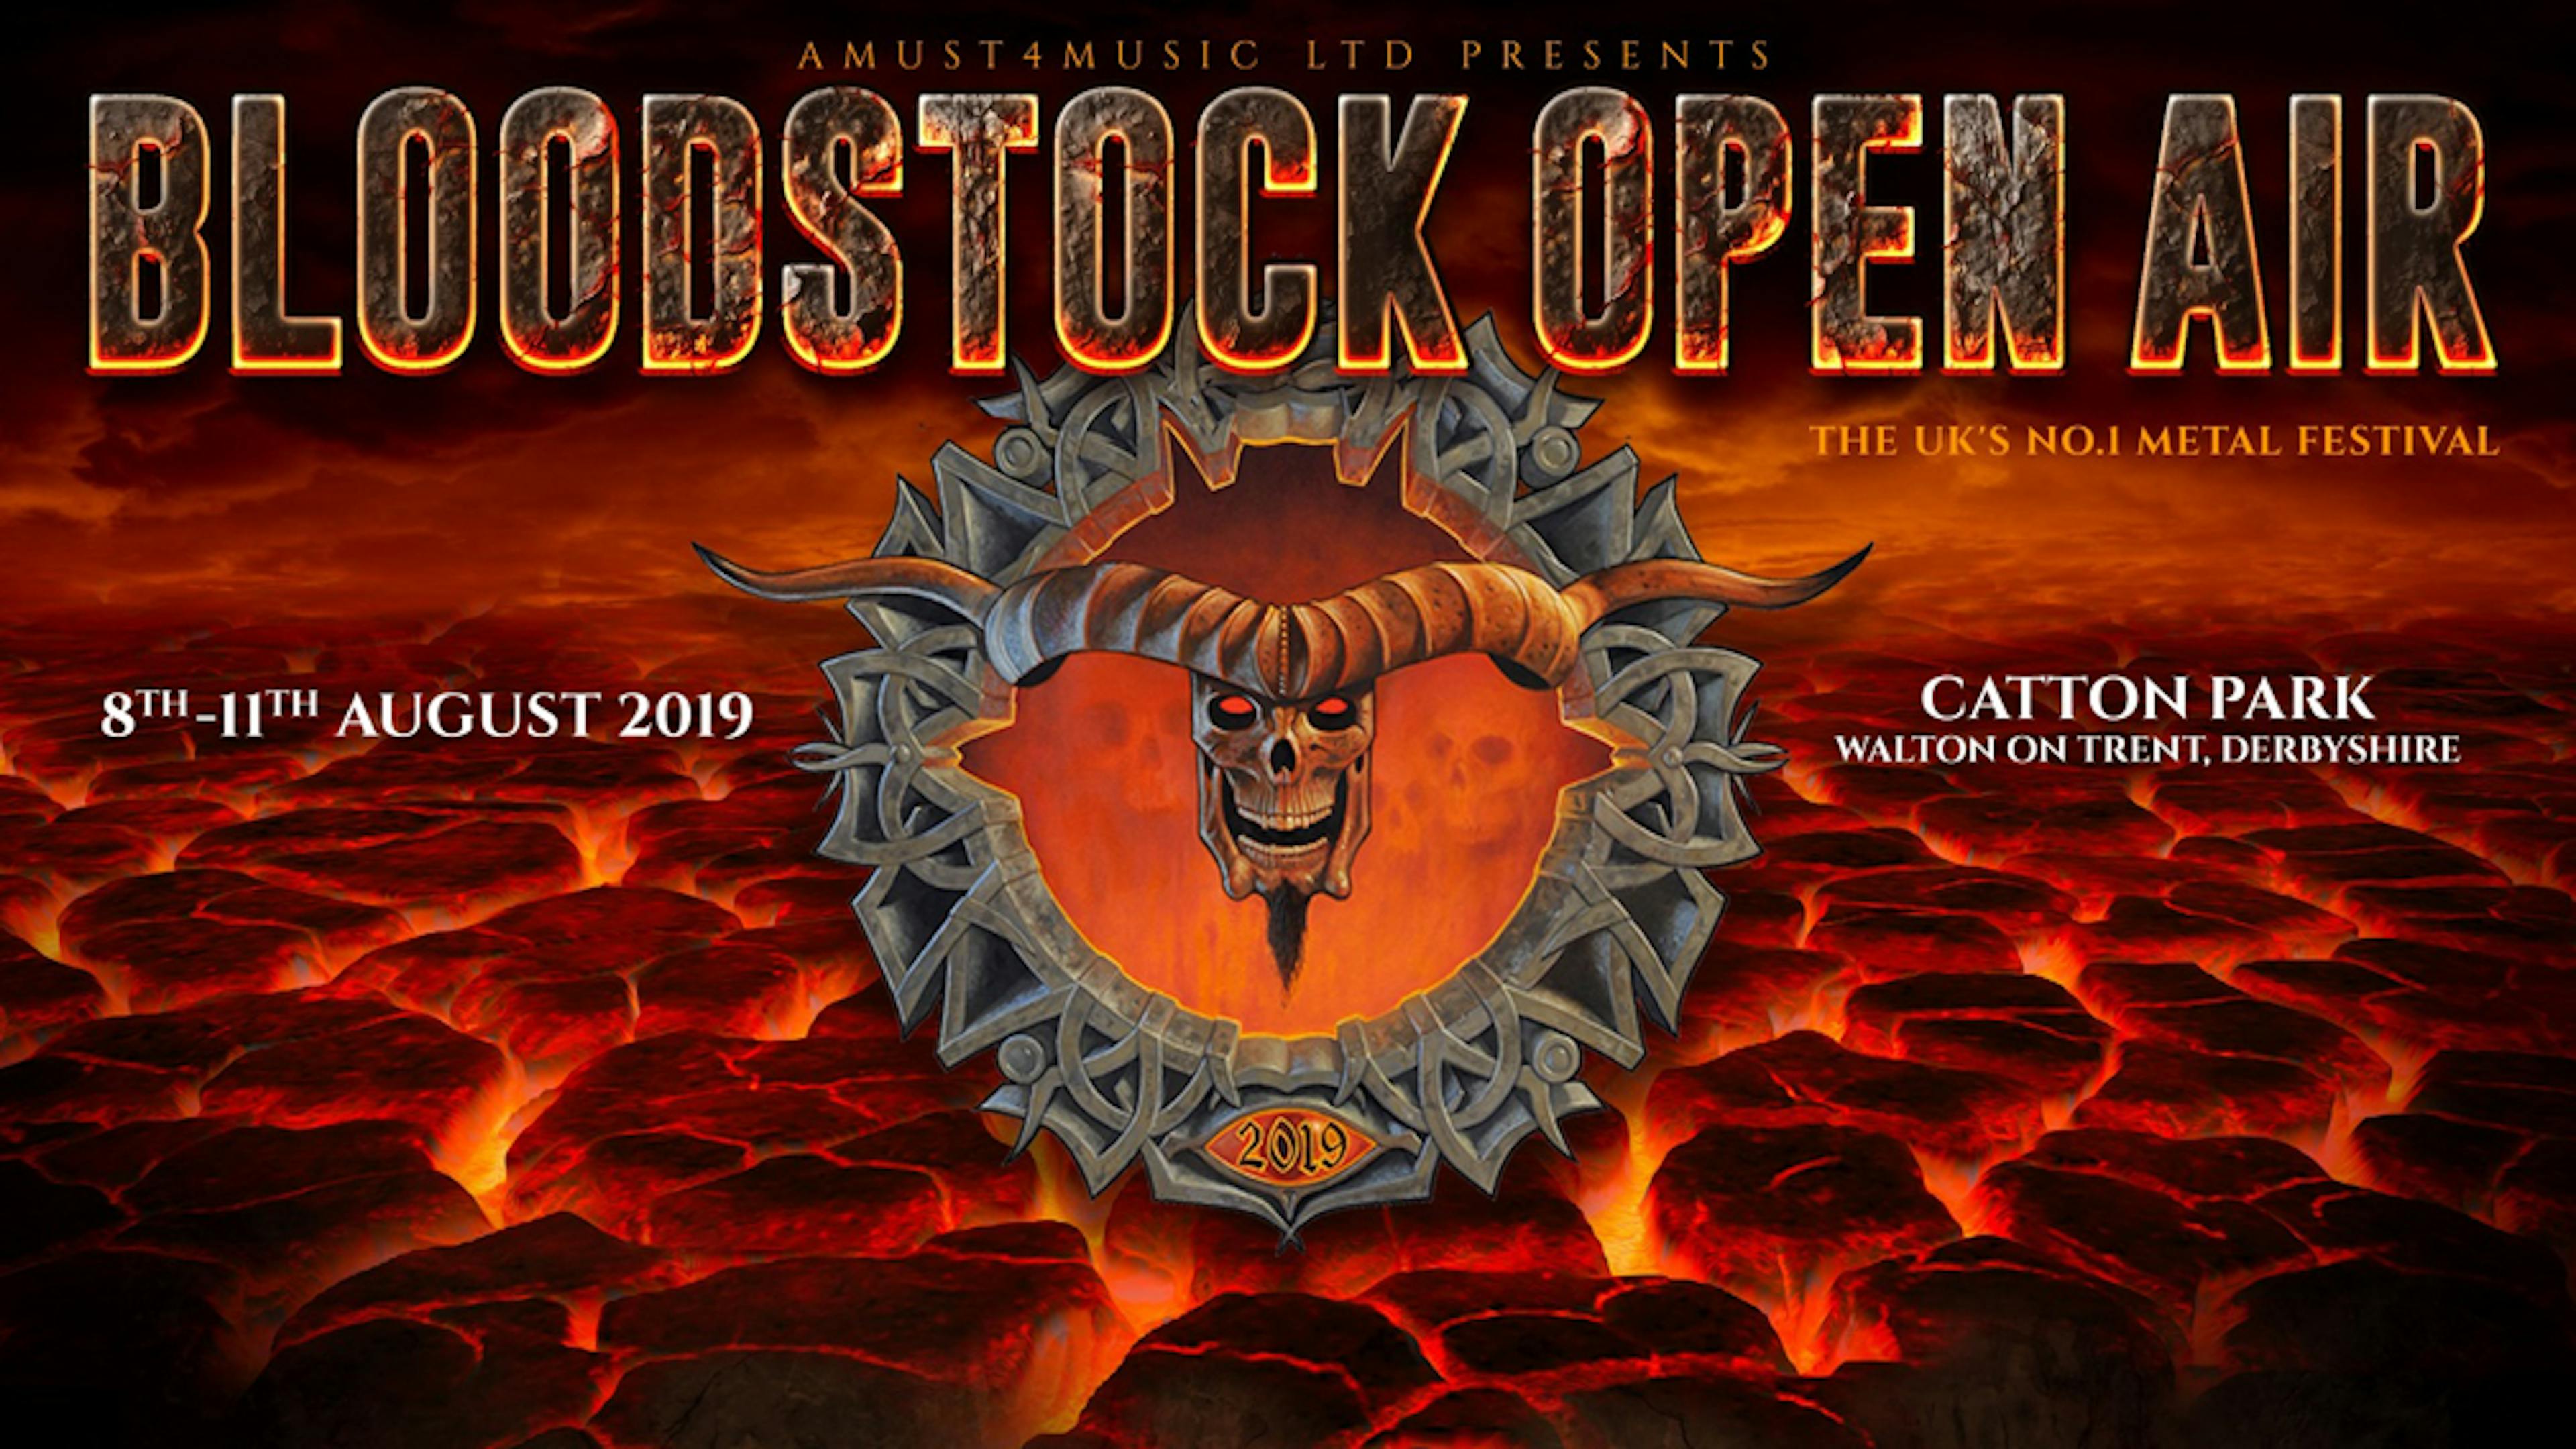 Listen To This Epic Bloodstock Playlist On Your Way To The Festival